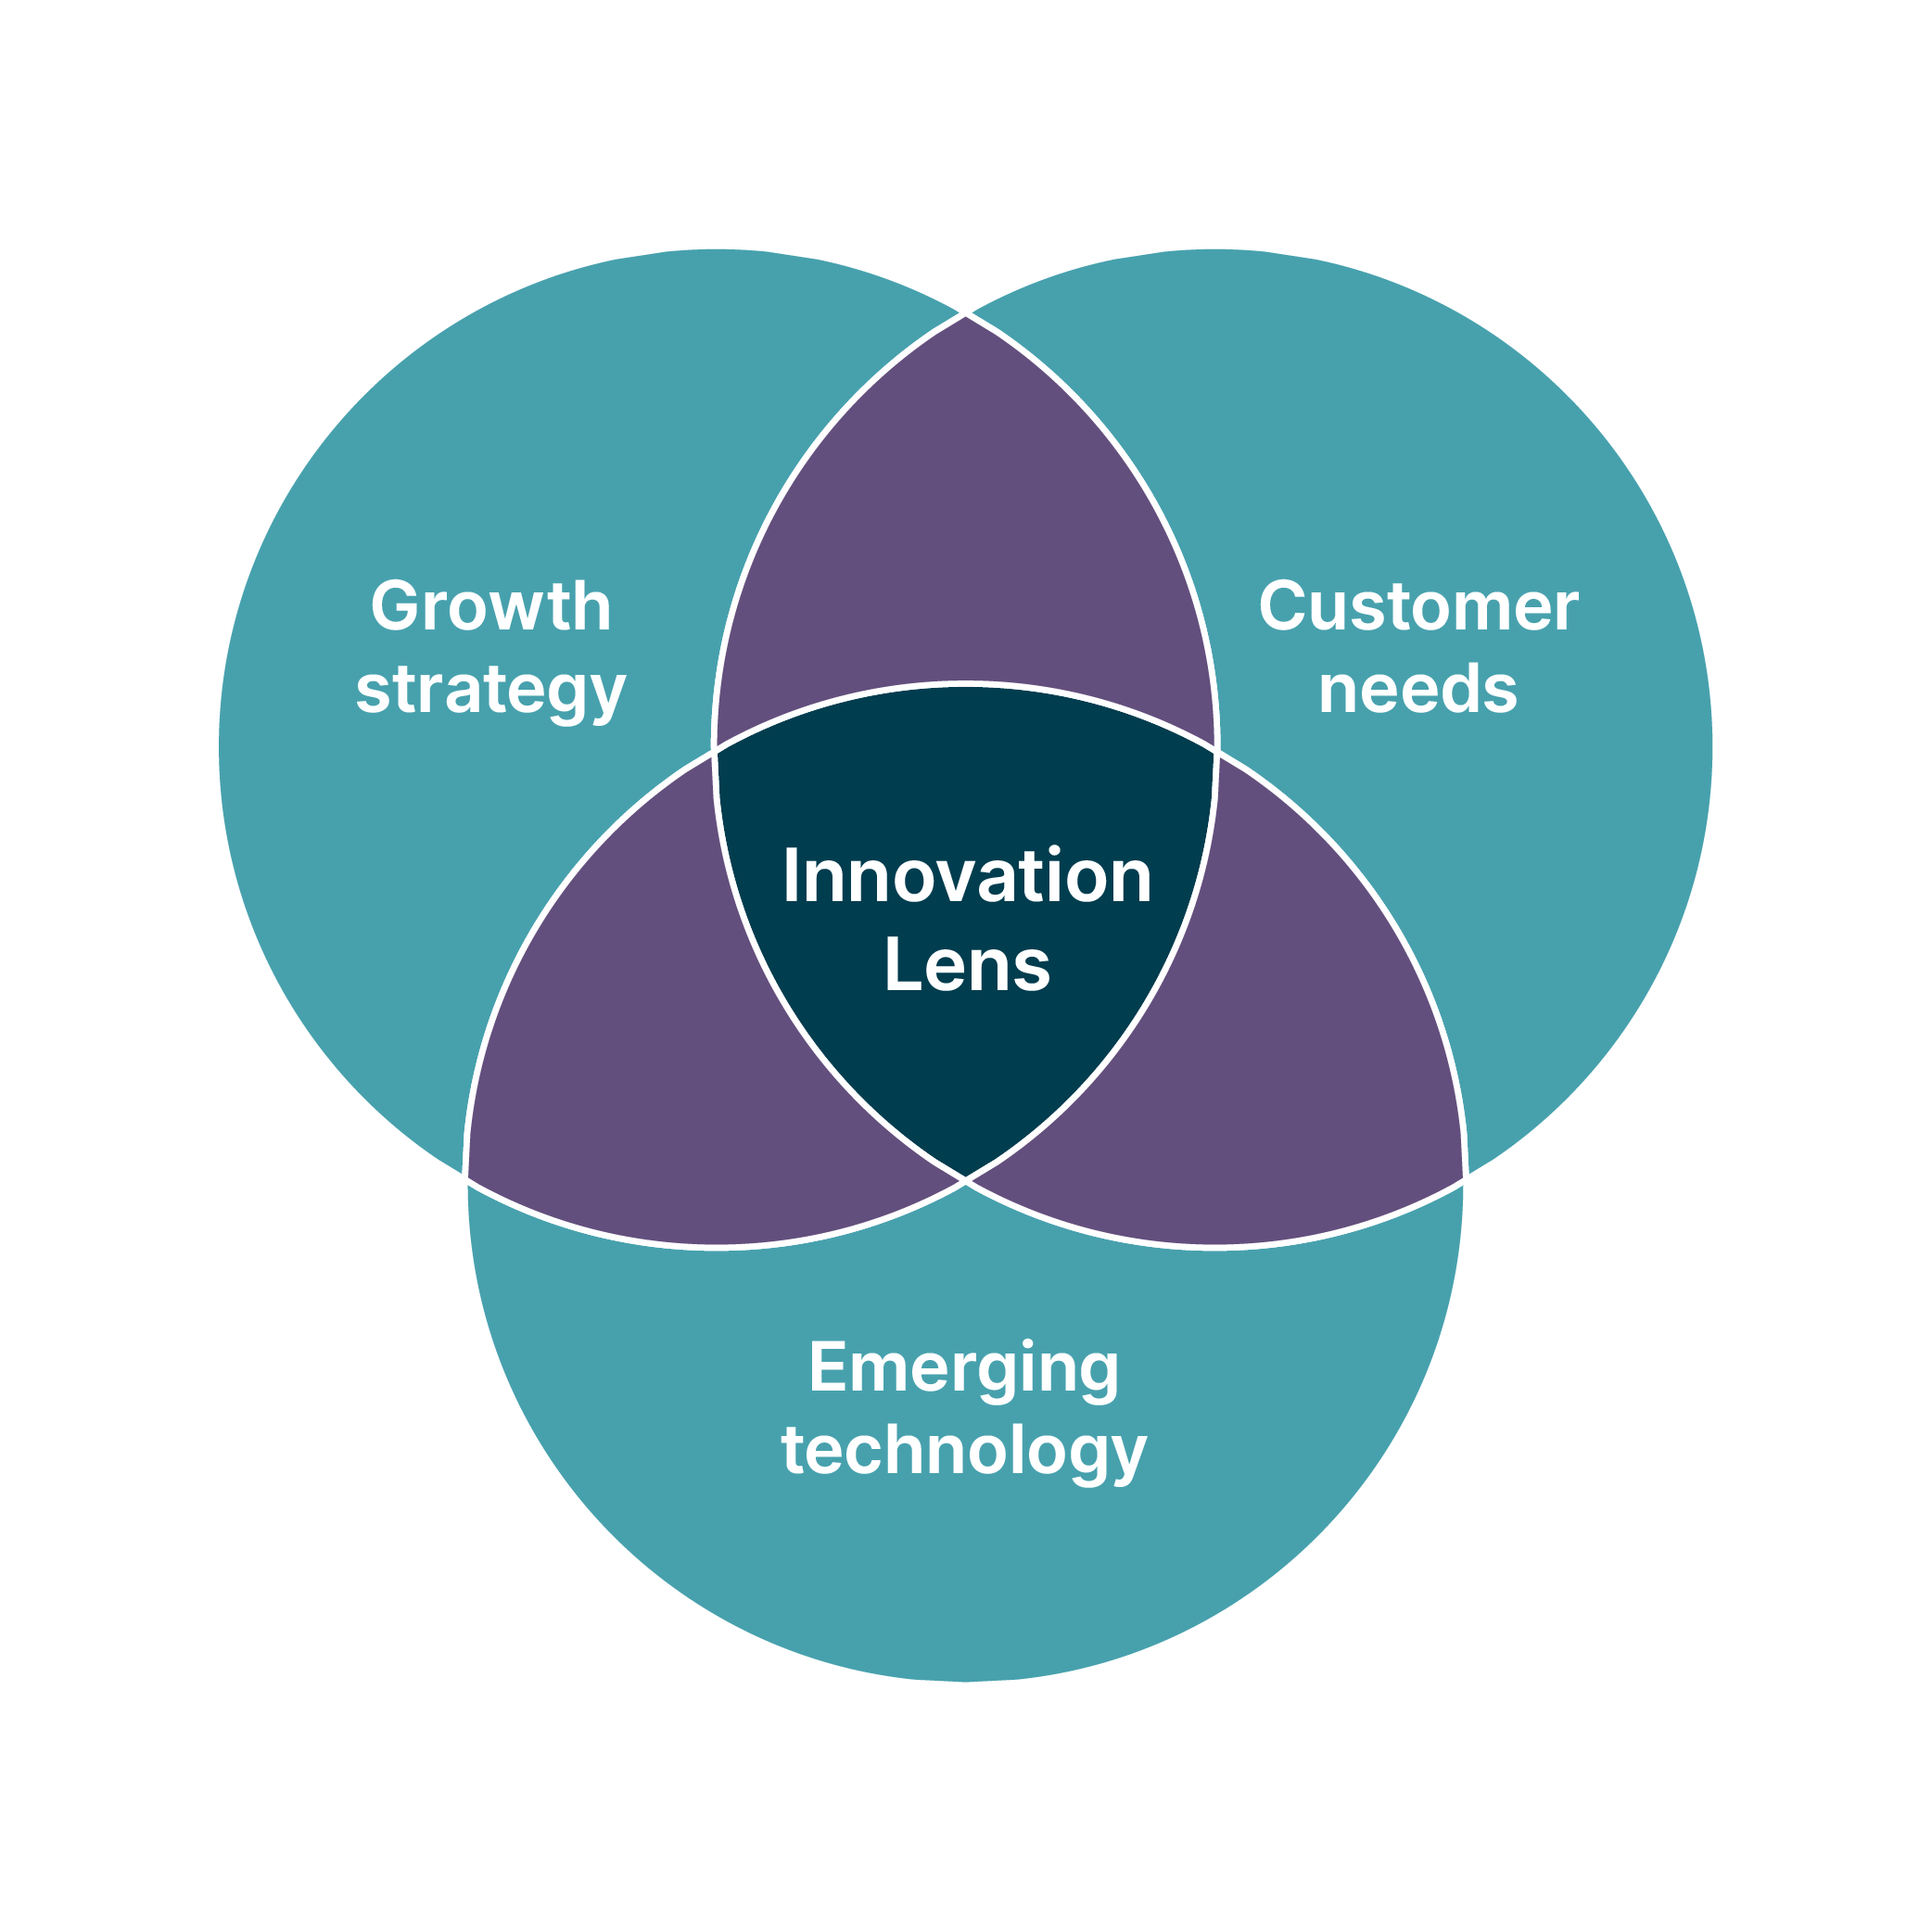 Venn diagram with three intersecting circles representing customer needs, growth strategy, and emerging technology for three lens of innovation